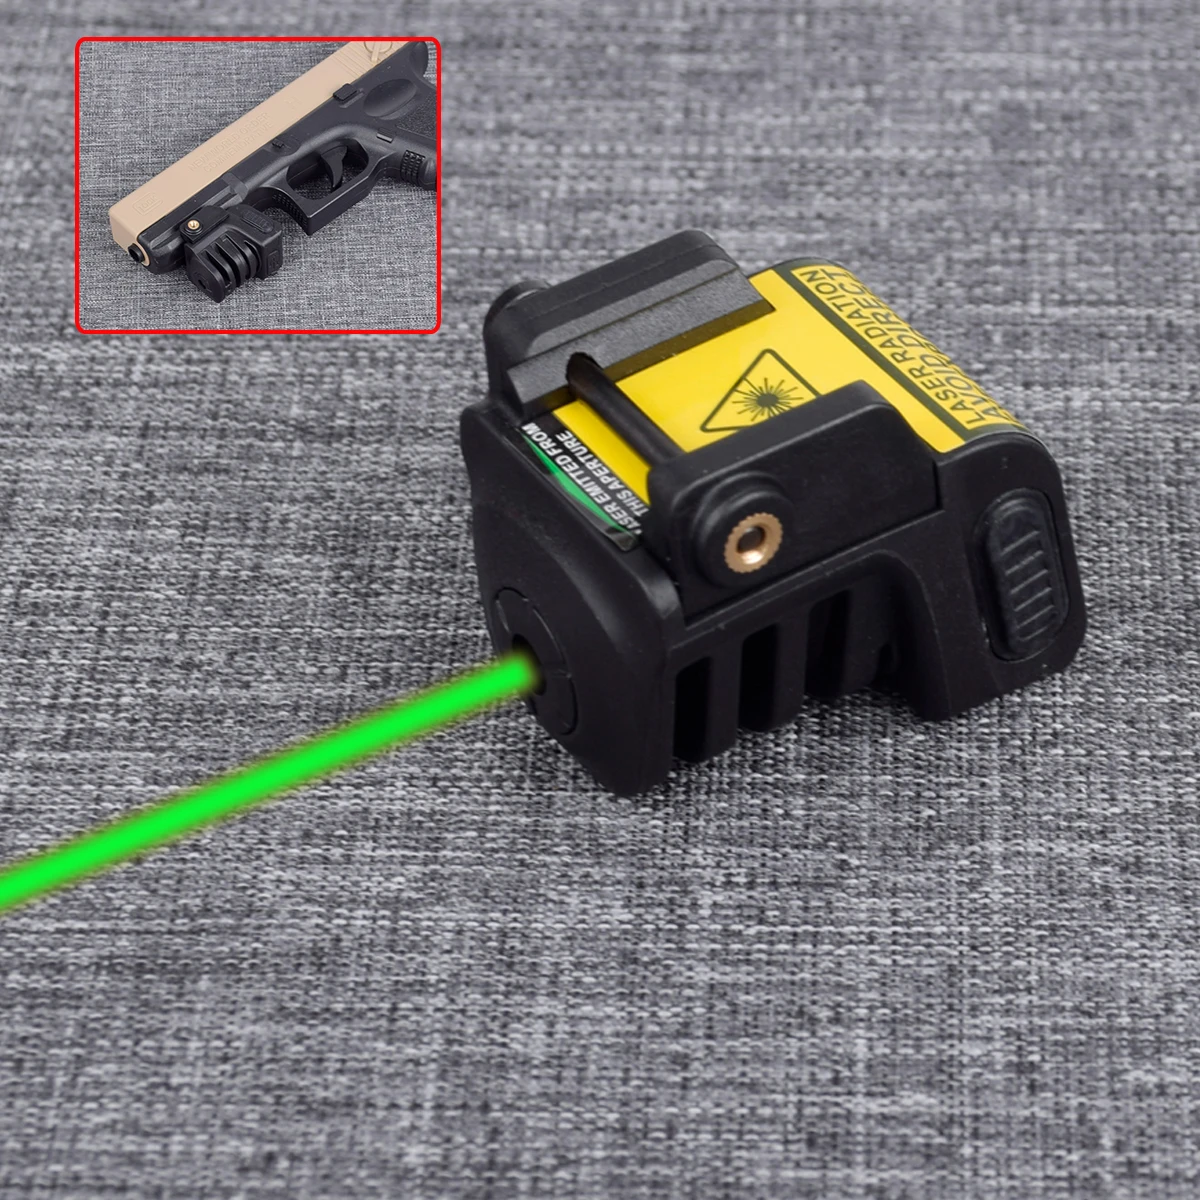 

Rechargeable Tactical Pistol Mini Red/Green Laser Military Gear For Almost Glock Colt 1911 Taurus Handgun Compact Laser Pointer